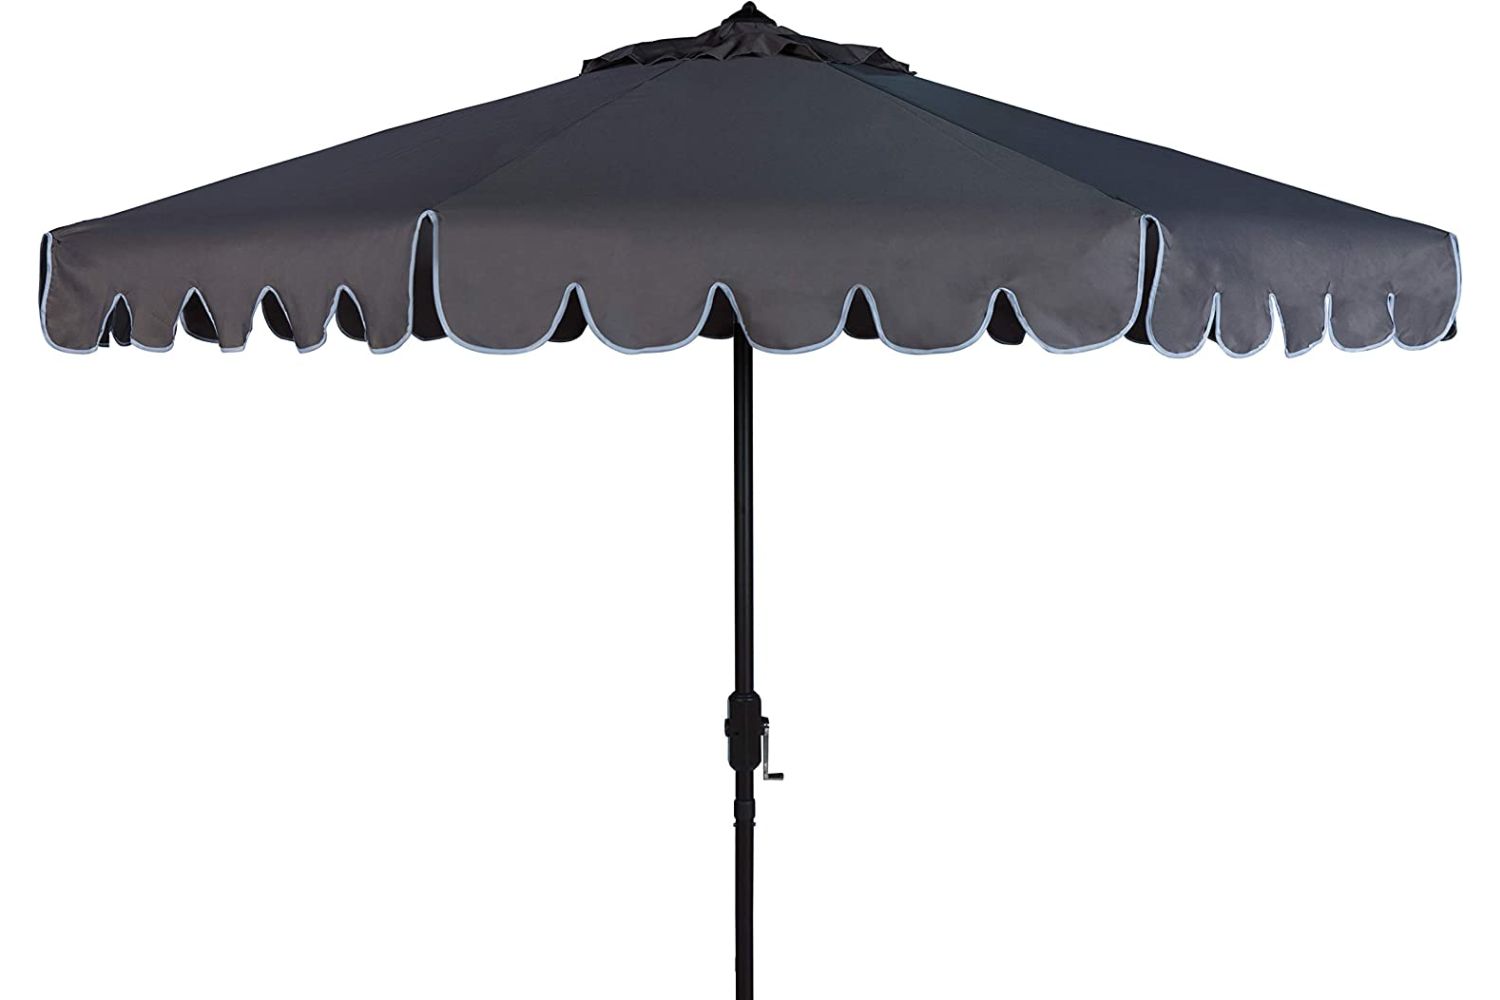 Everything You Need for a Backyard Cookout Options: Safavieh Venice Umbrella